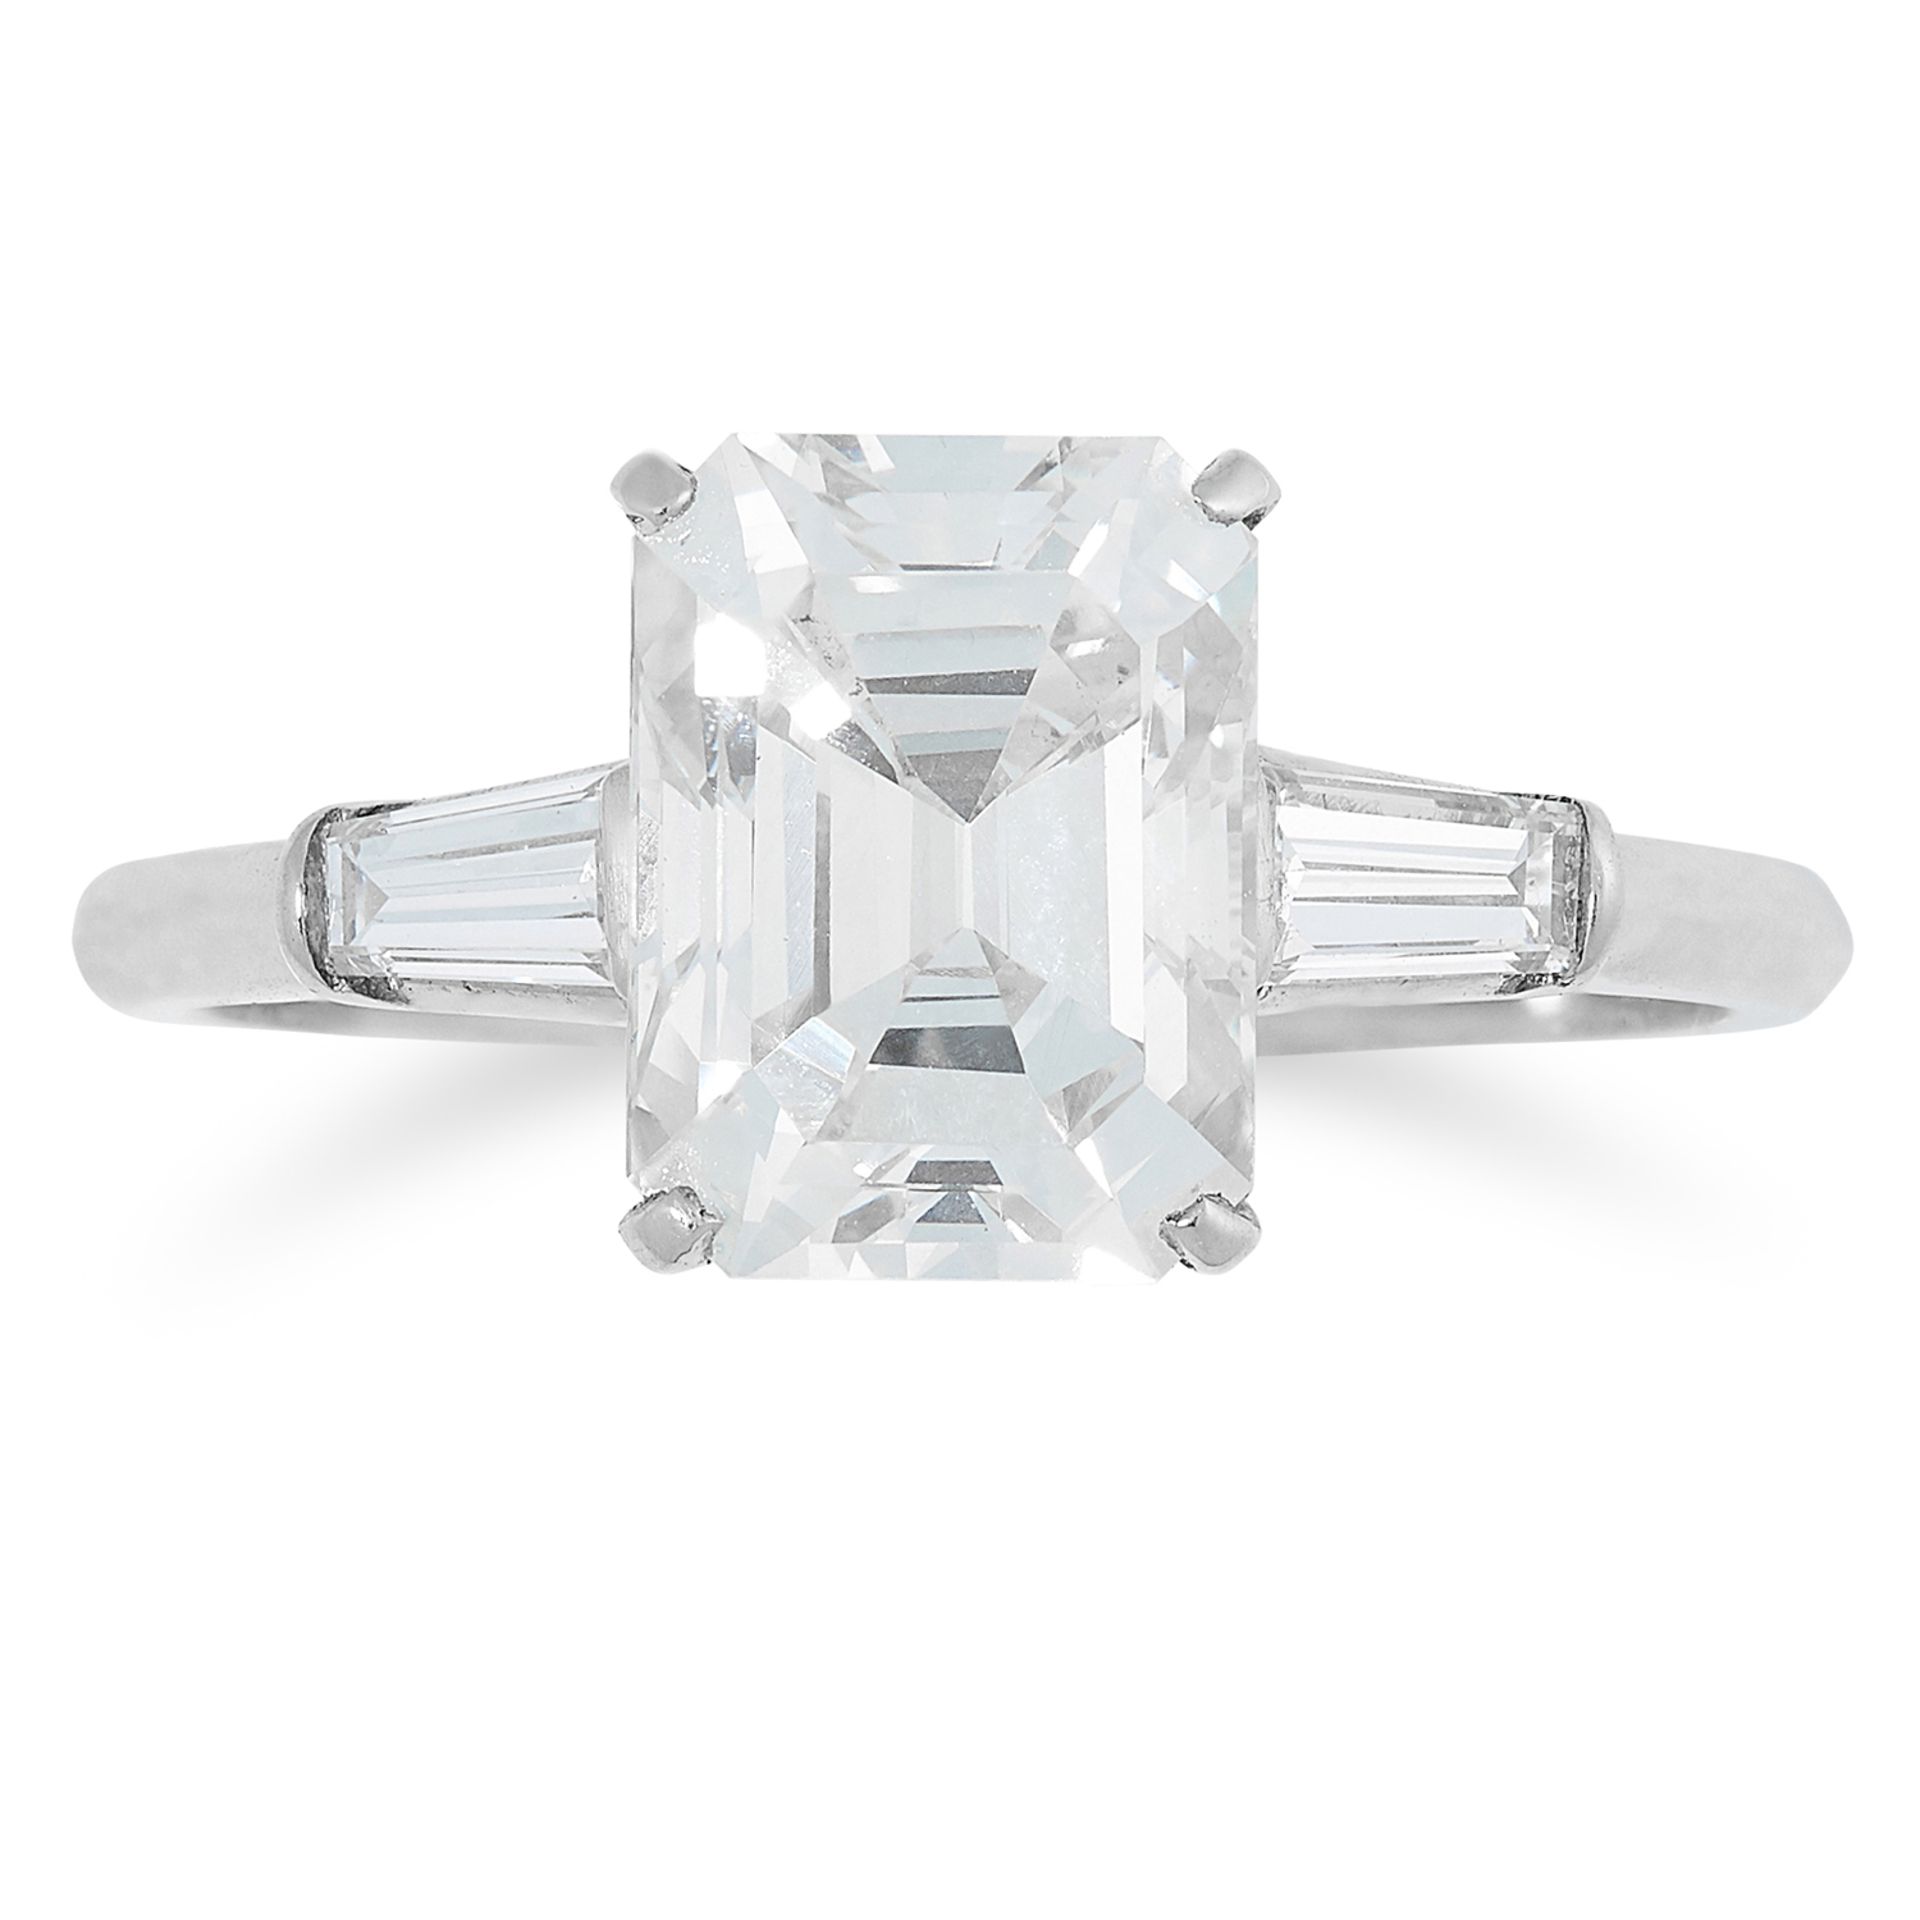 2.48 CARAT DIAMOND RING set with an emerald cut diamond of 2.48 carats between two tapered baguette